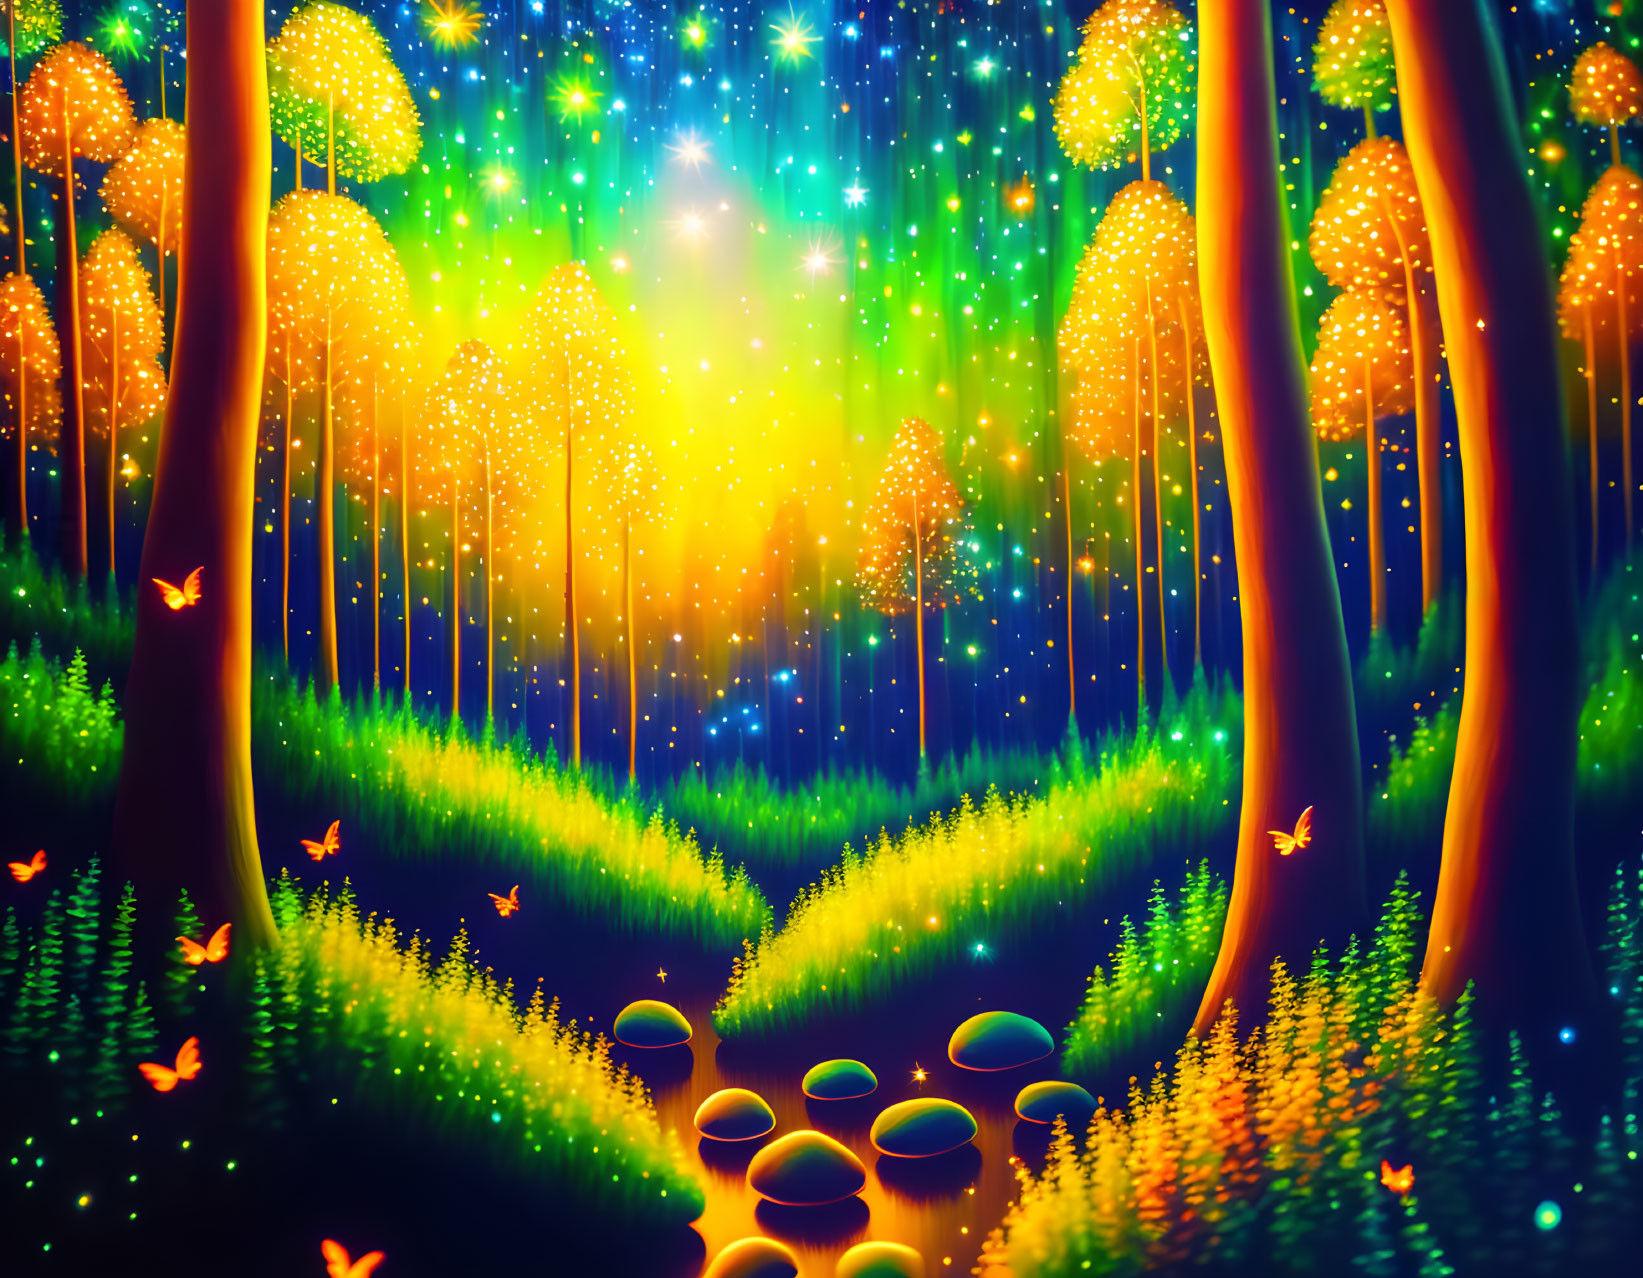 Enchanted forest digital artwork with glowing trees and fireflies